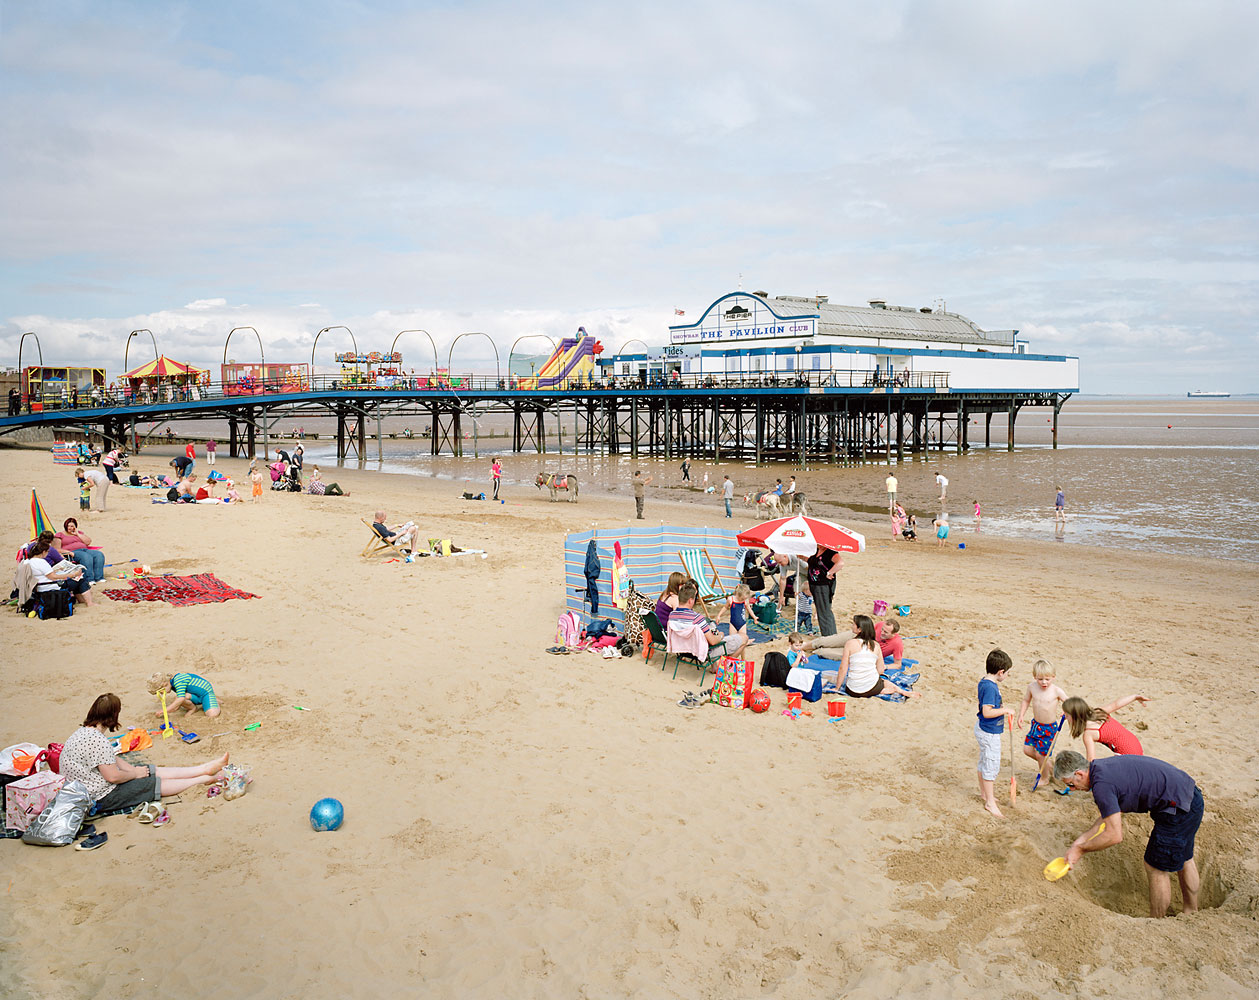 Cleethorpes Pier, North East Lincolnshire, September 2012